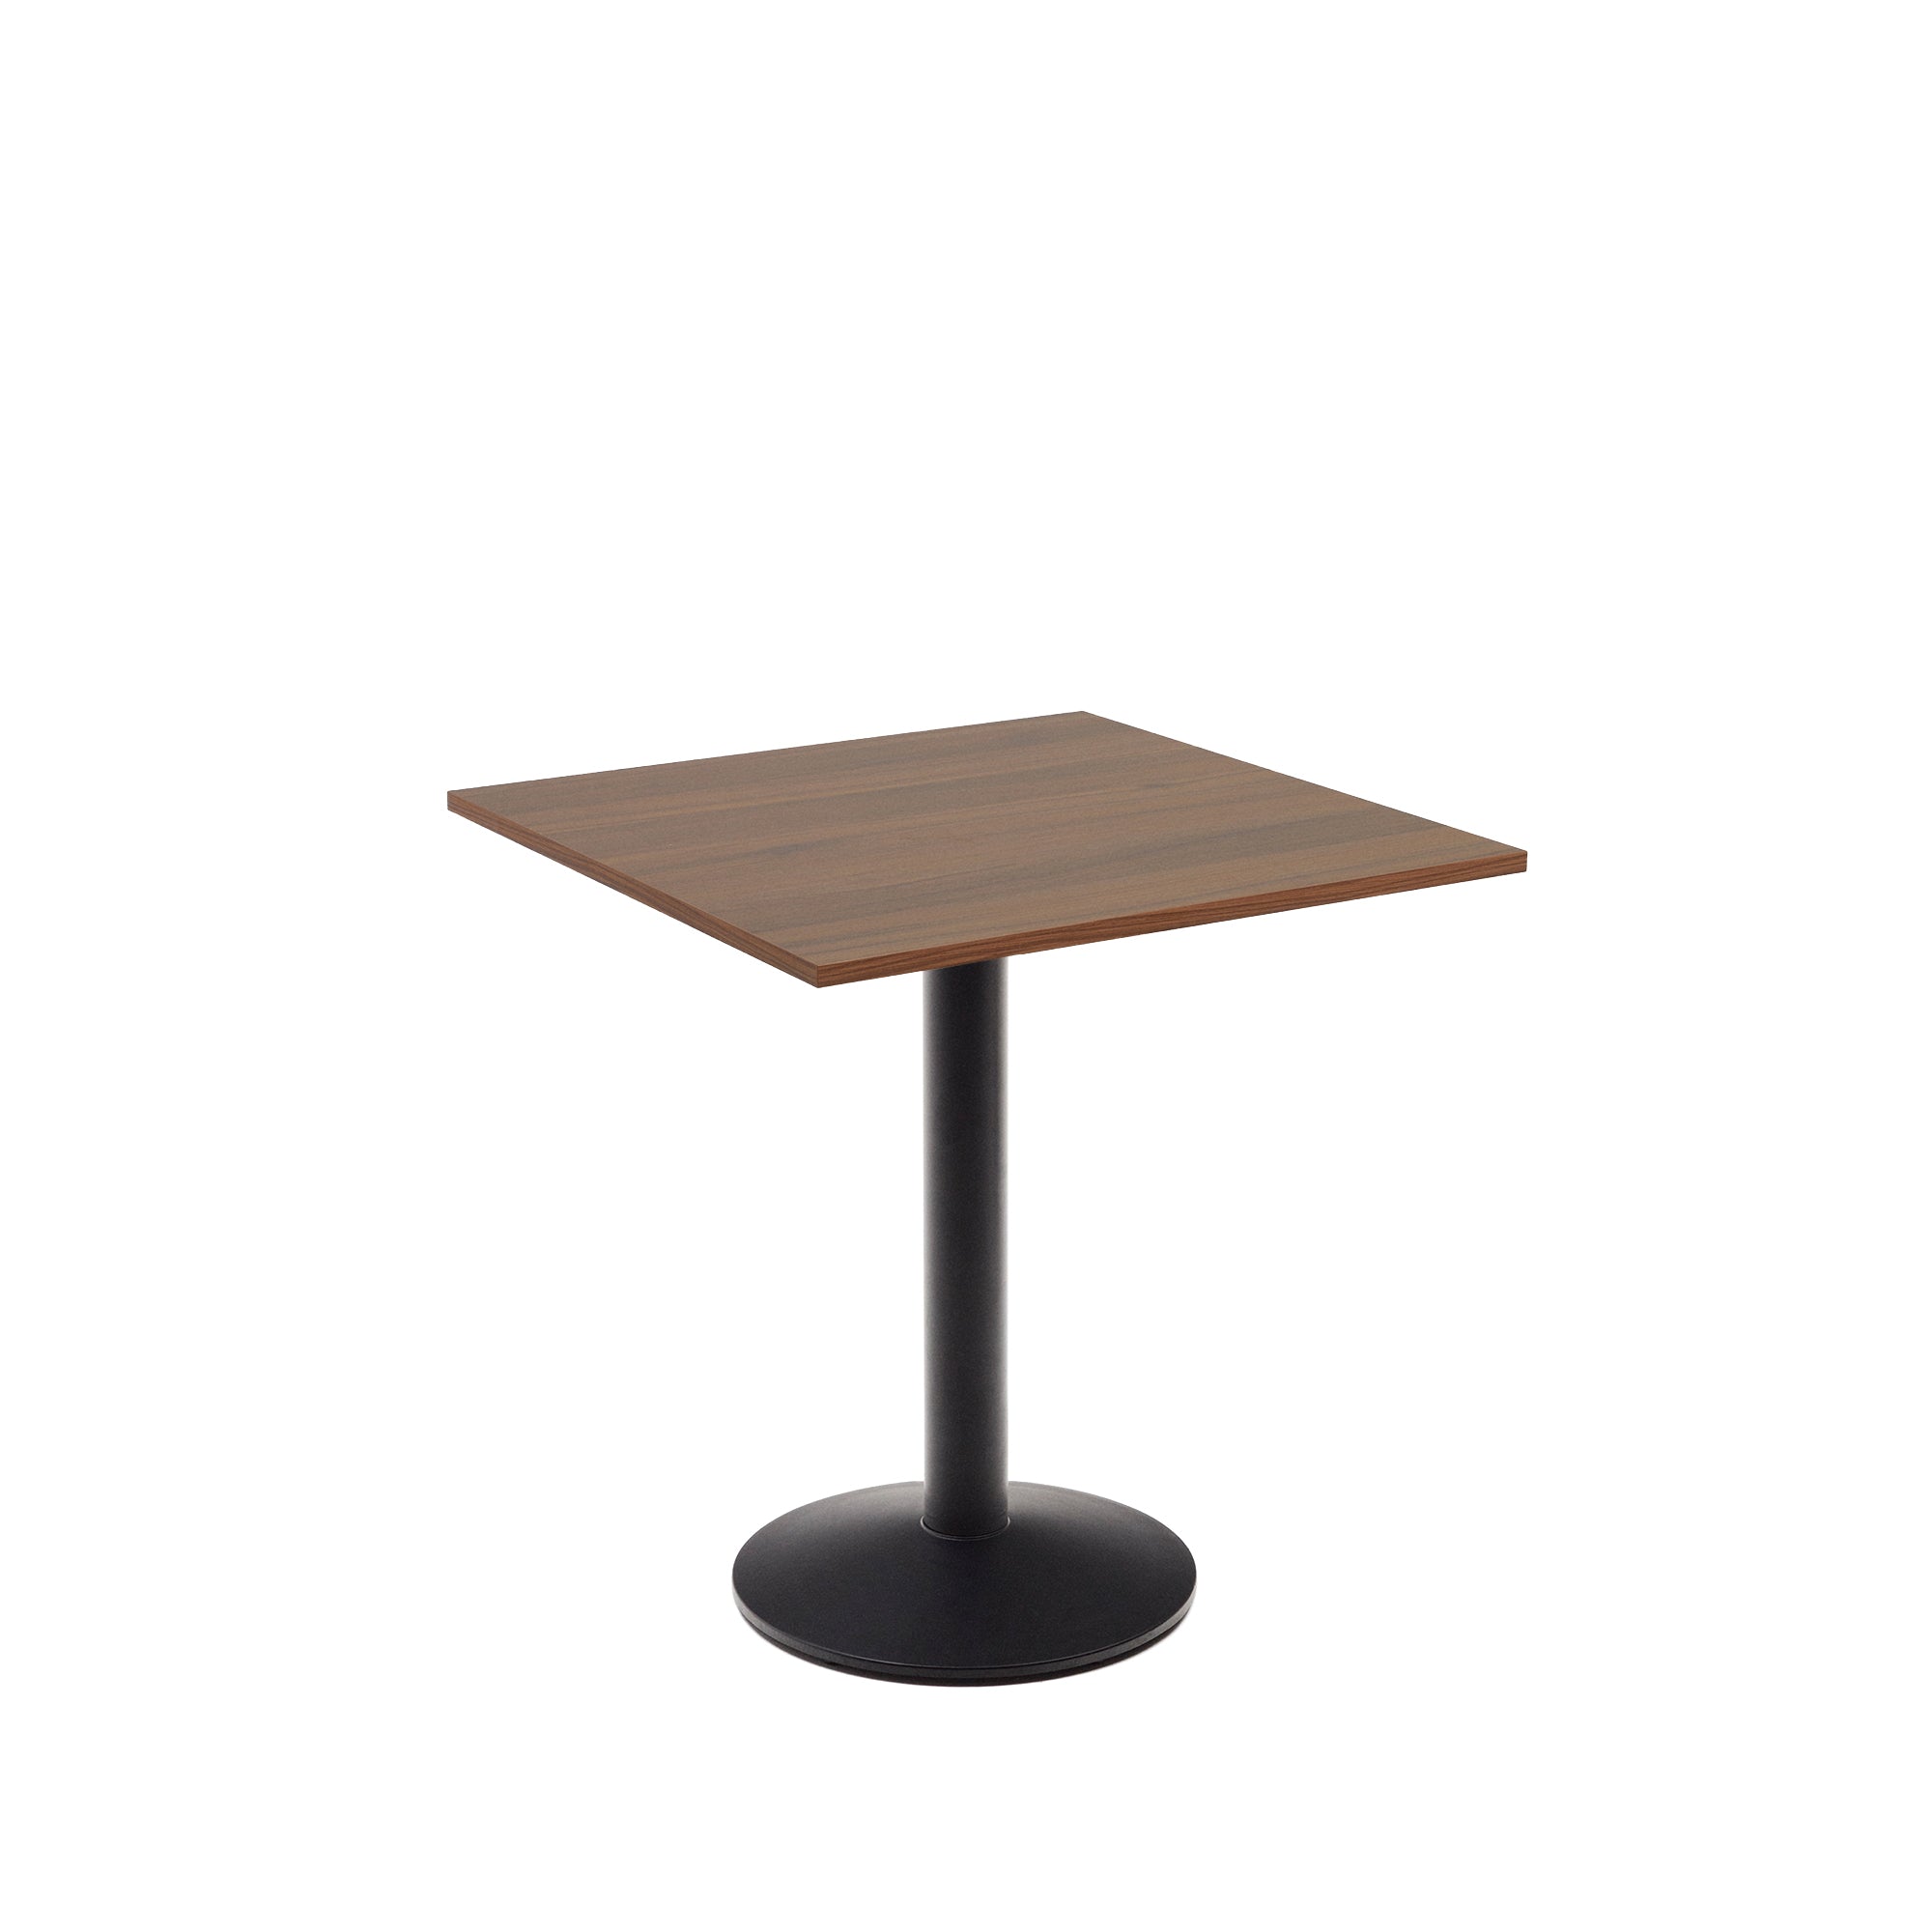 Esilda table in walnut finish melamine with metal leg in a painted black finish, 70 x 70 x 70 cm